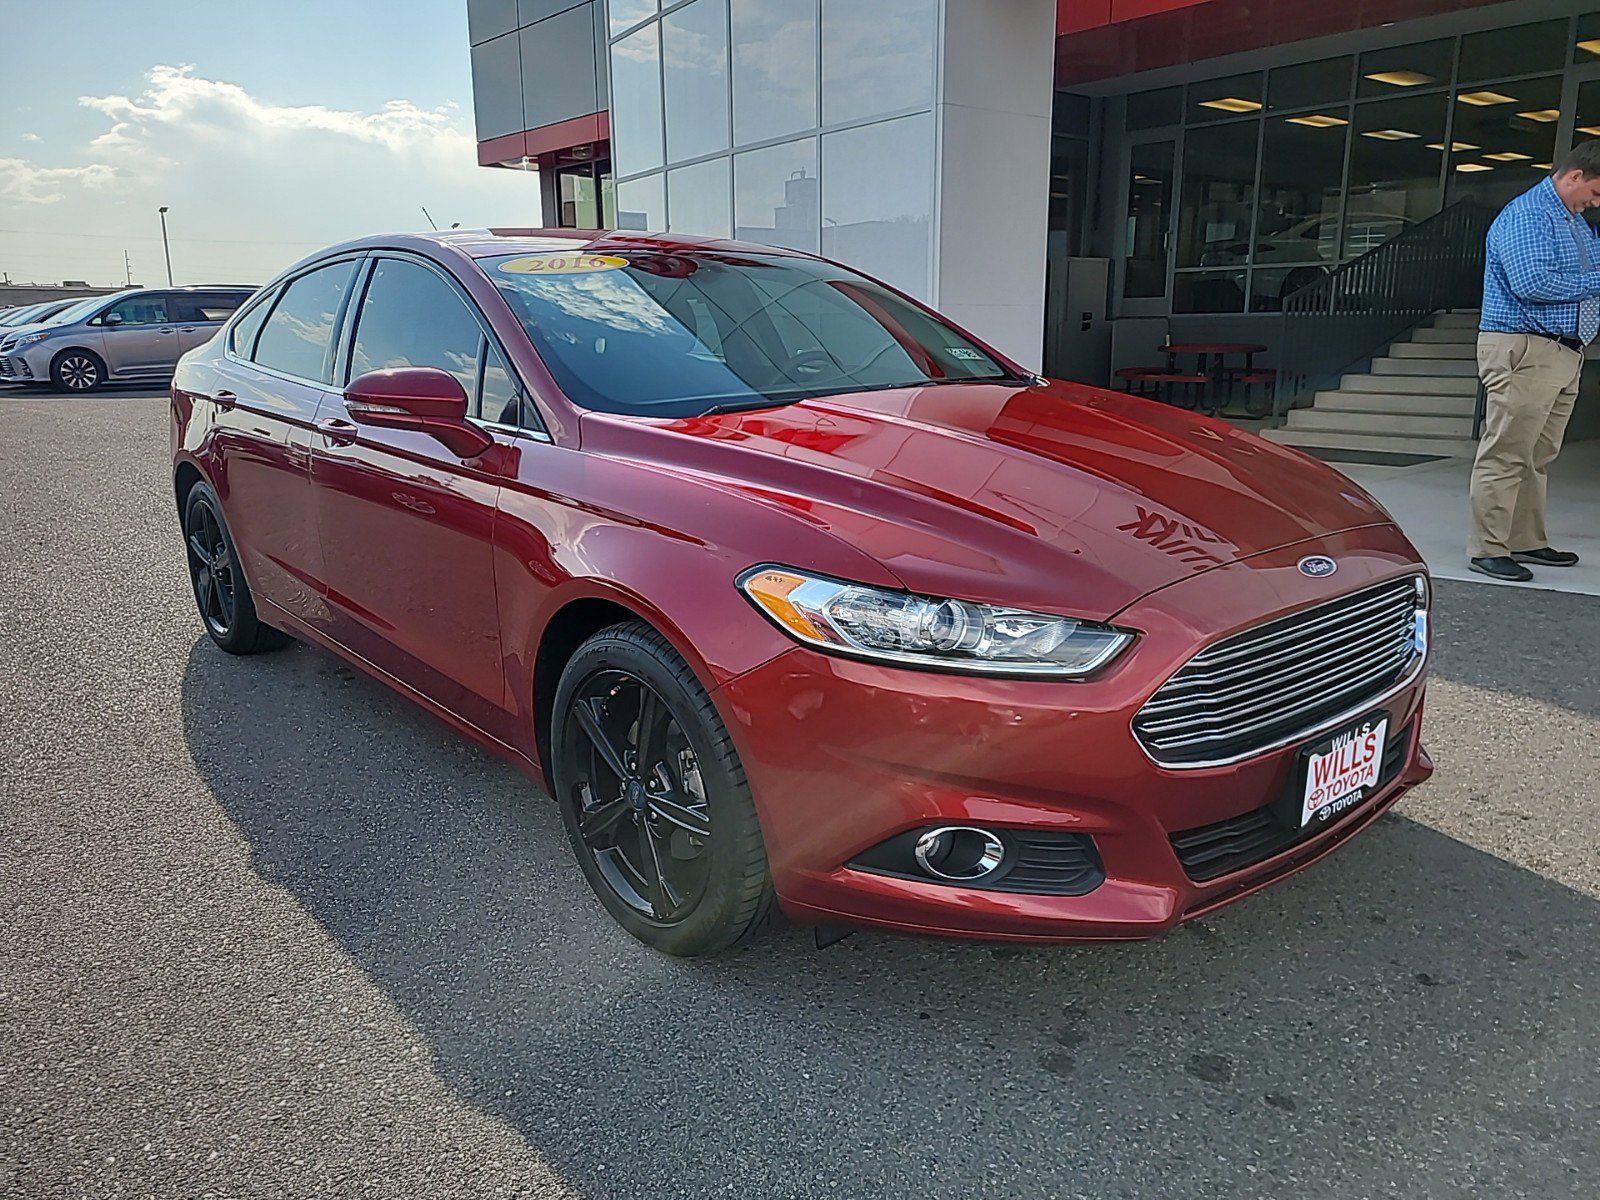 2016 - Ford - Fusion - $14,199